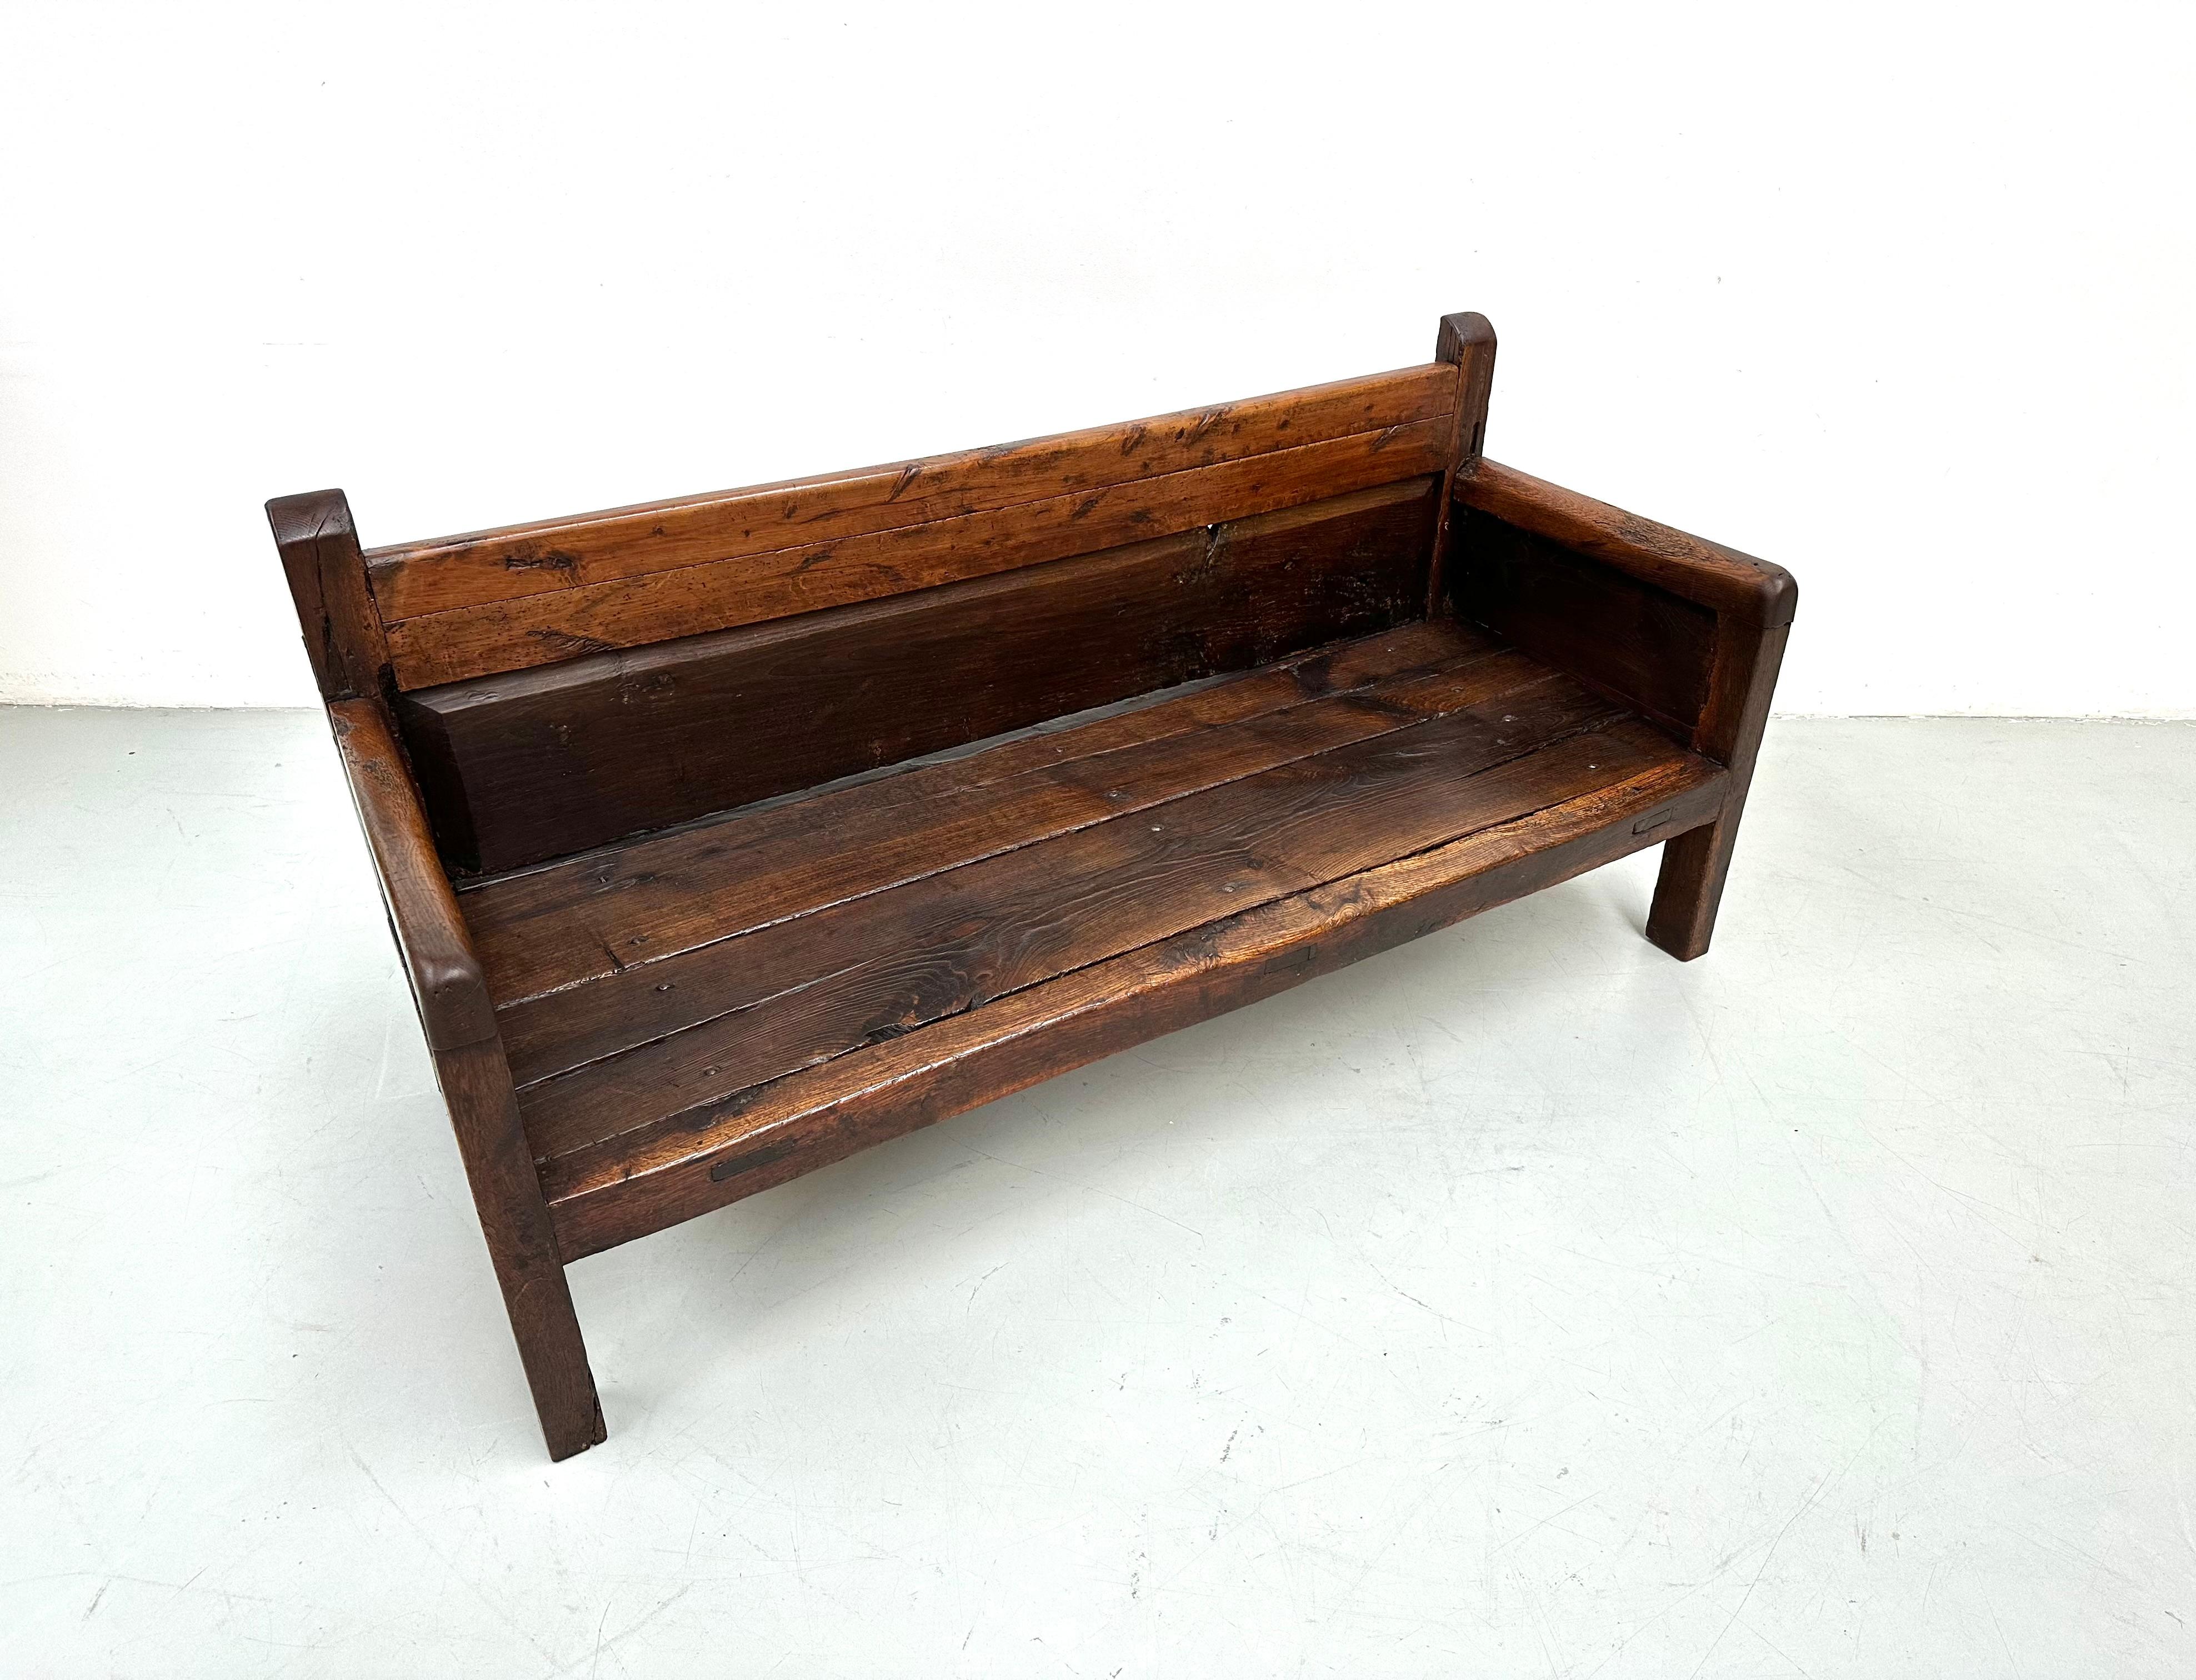 Fruitwood Antique Handmade Minimalistic Spanish Chestnut Wood Bench, Early 19th Century For Sale